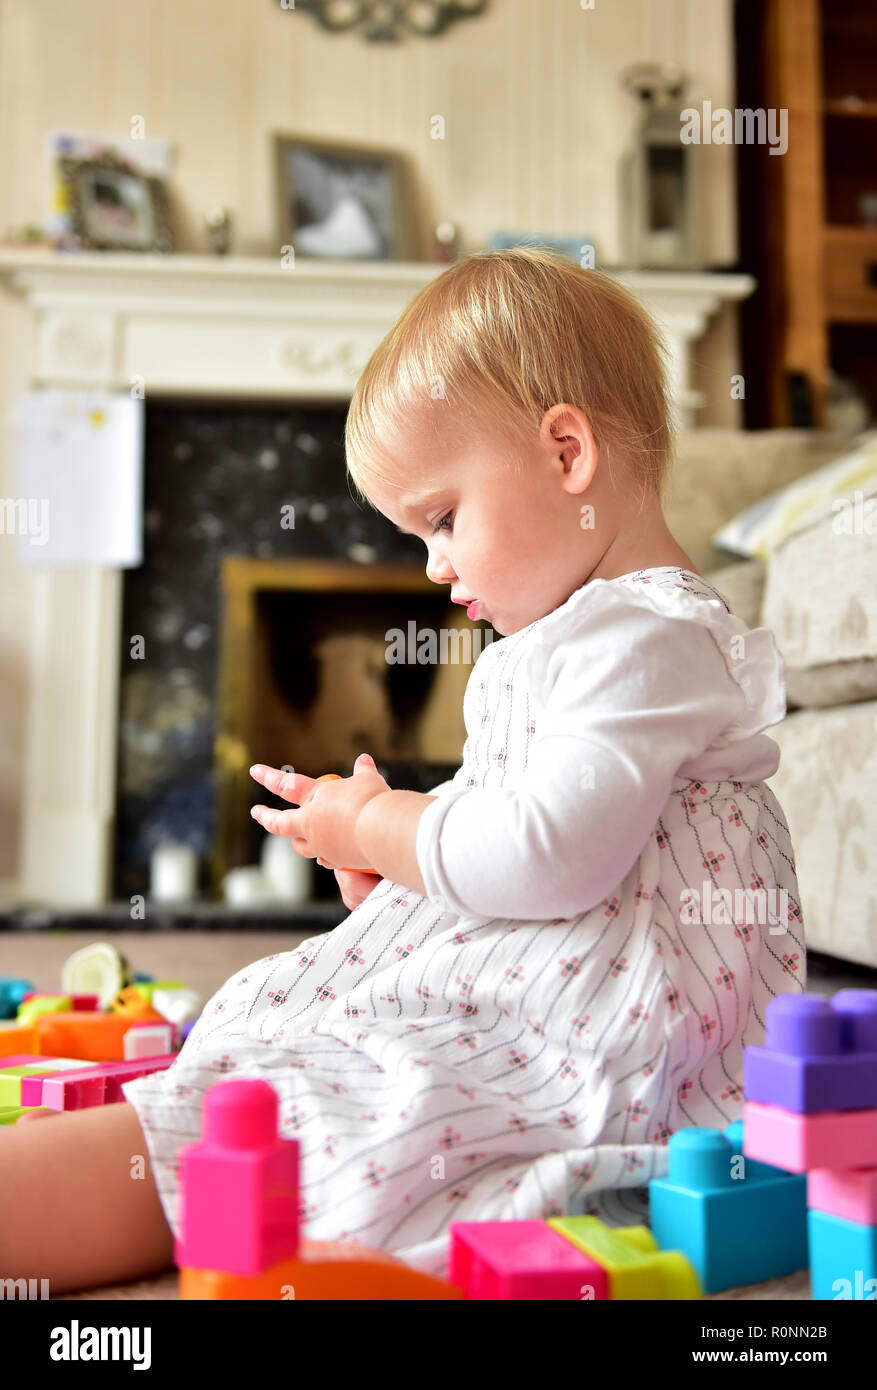 Young baby toddler girl aged two years old playing alone Photograph taken by Simon Dack Stock Photo